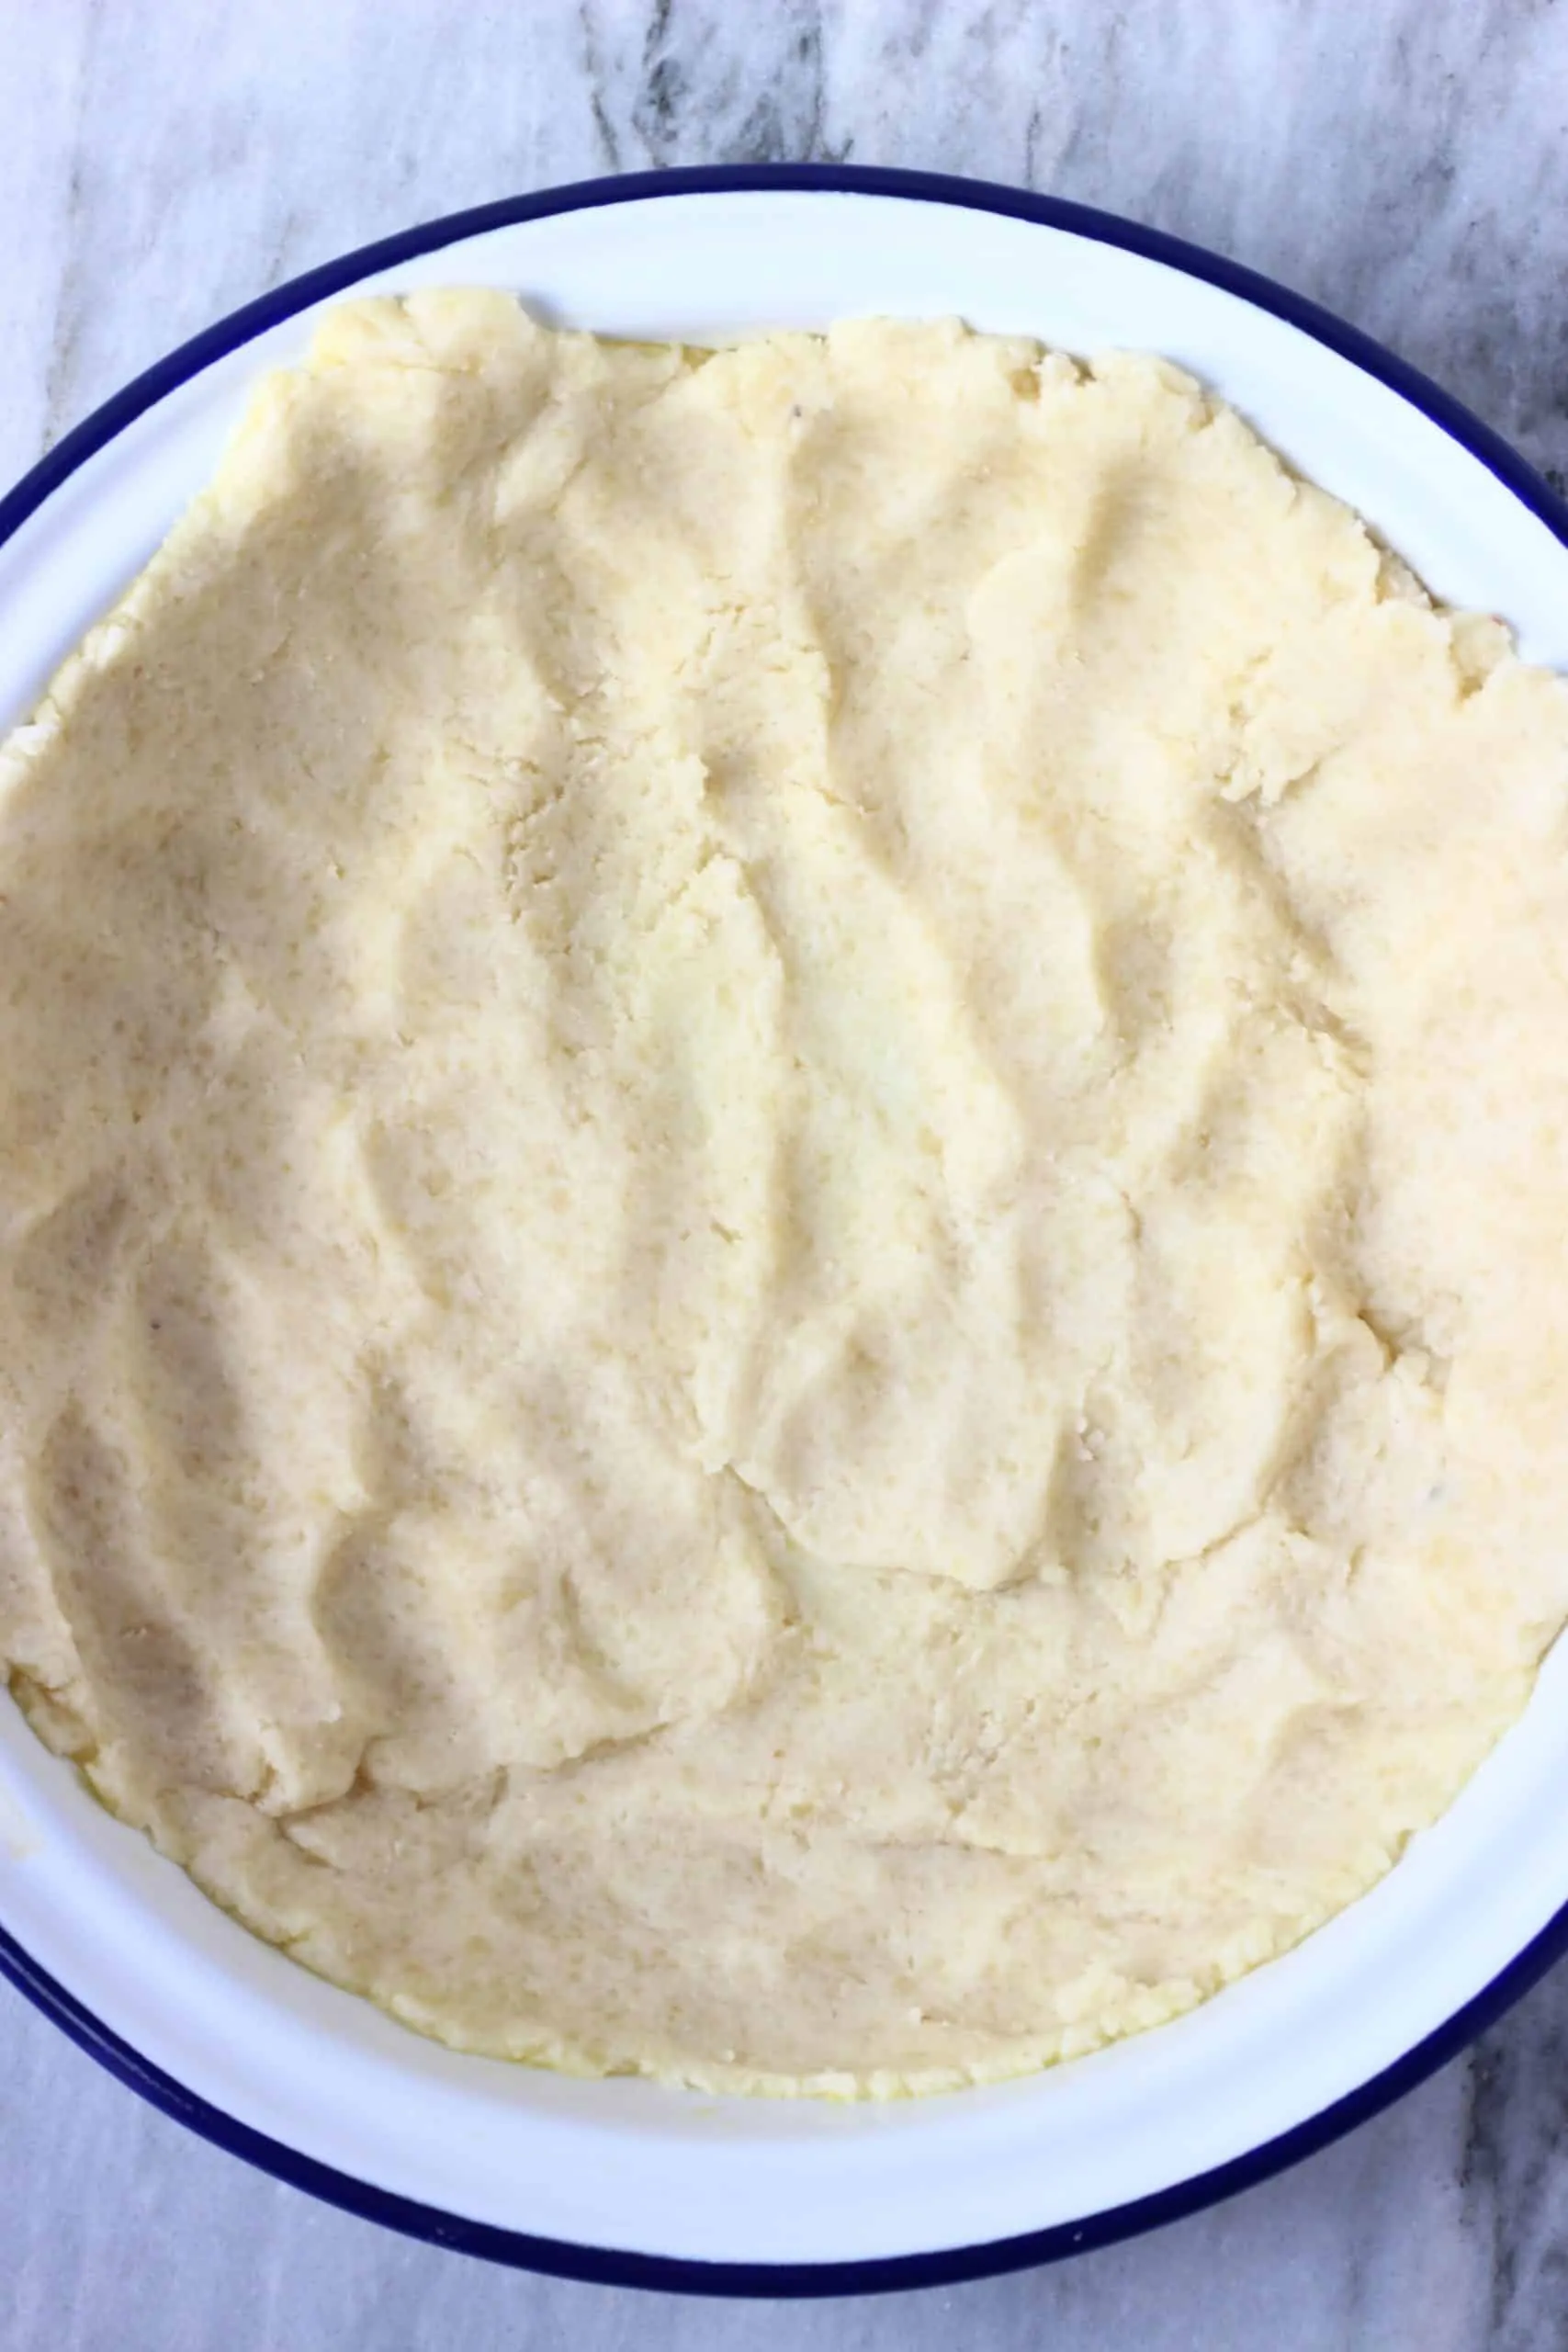 Gluten-free vegan pastry dough being pressed along the bottom of a pie dish